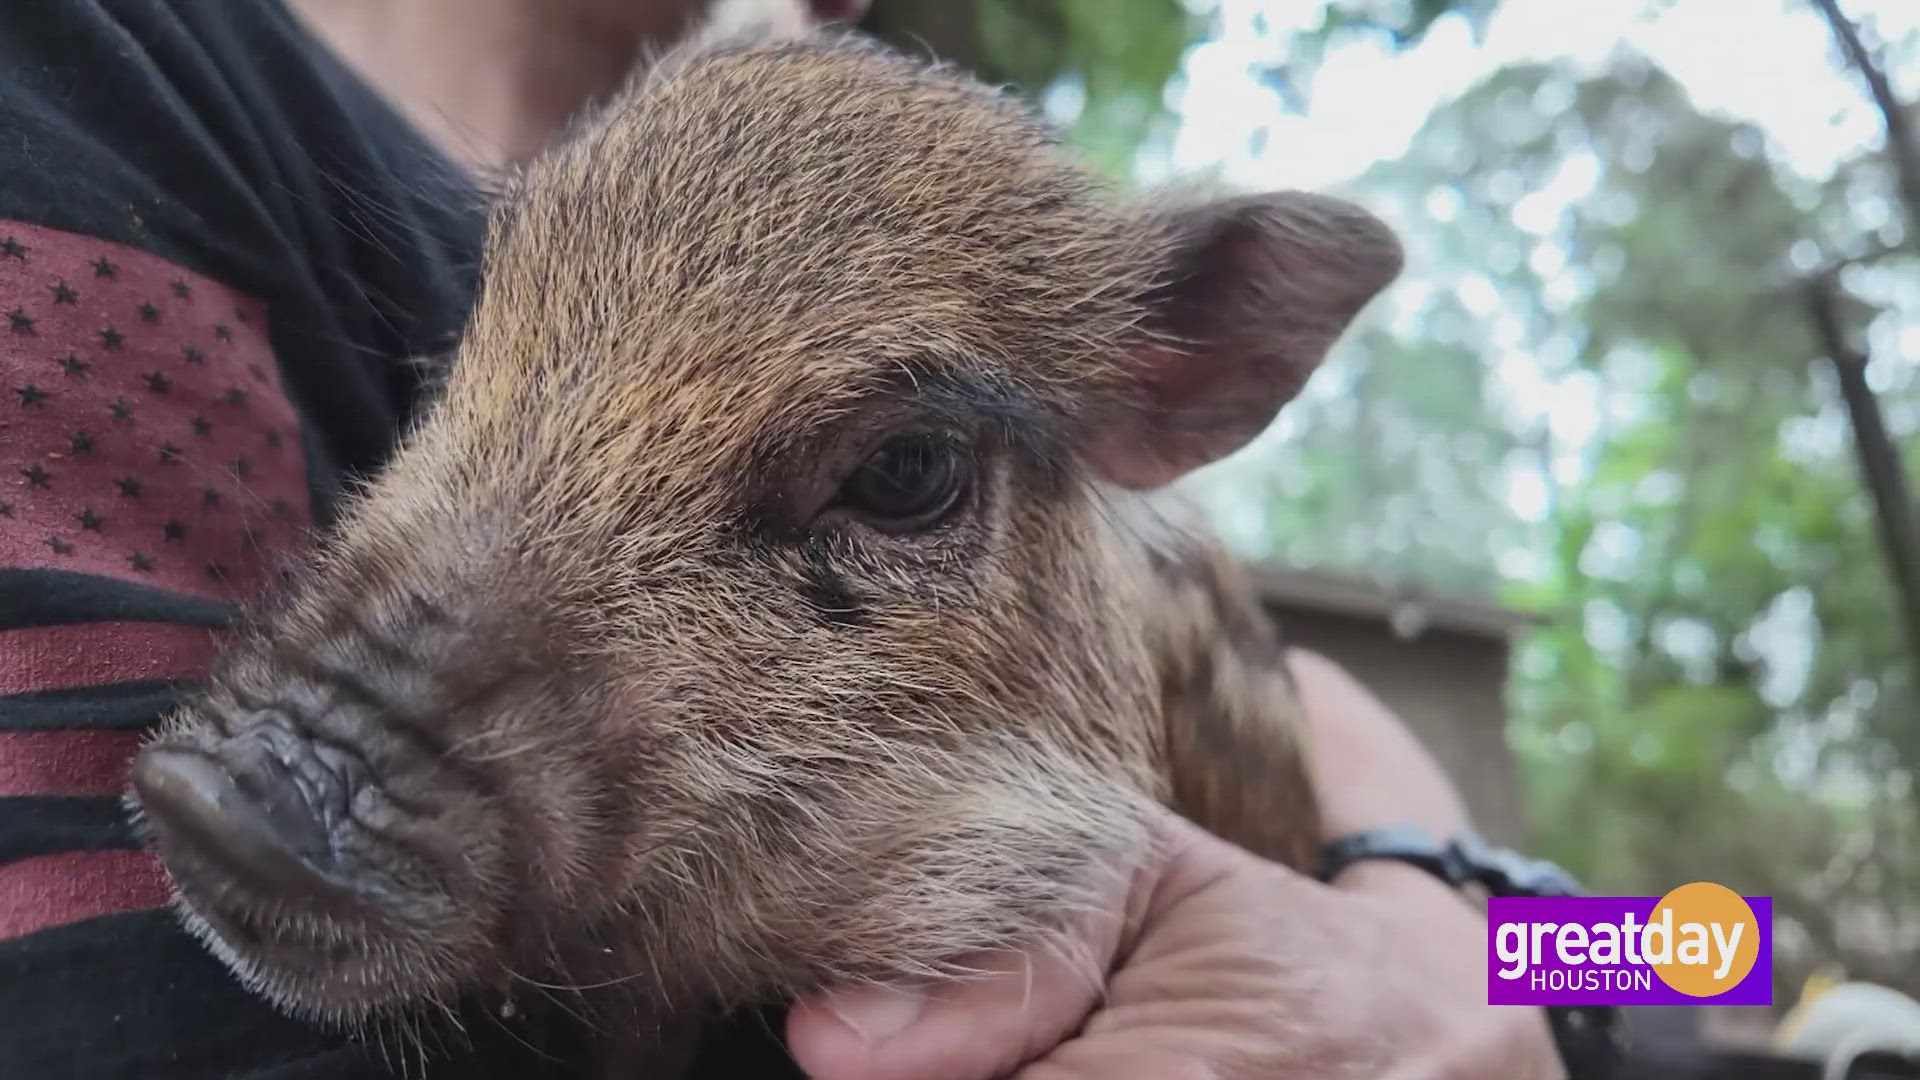 If you're looking for a non-traditional furry friend, here's an alternative that could make you squeal with delight – How about a mini pig?